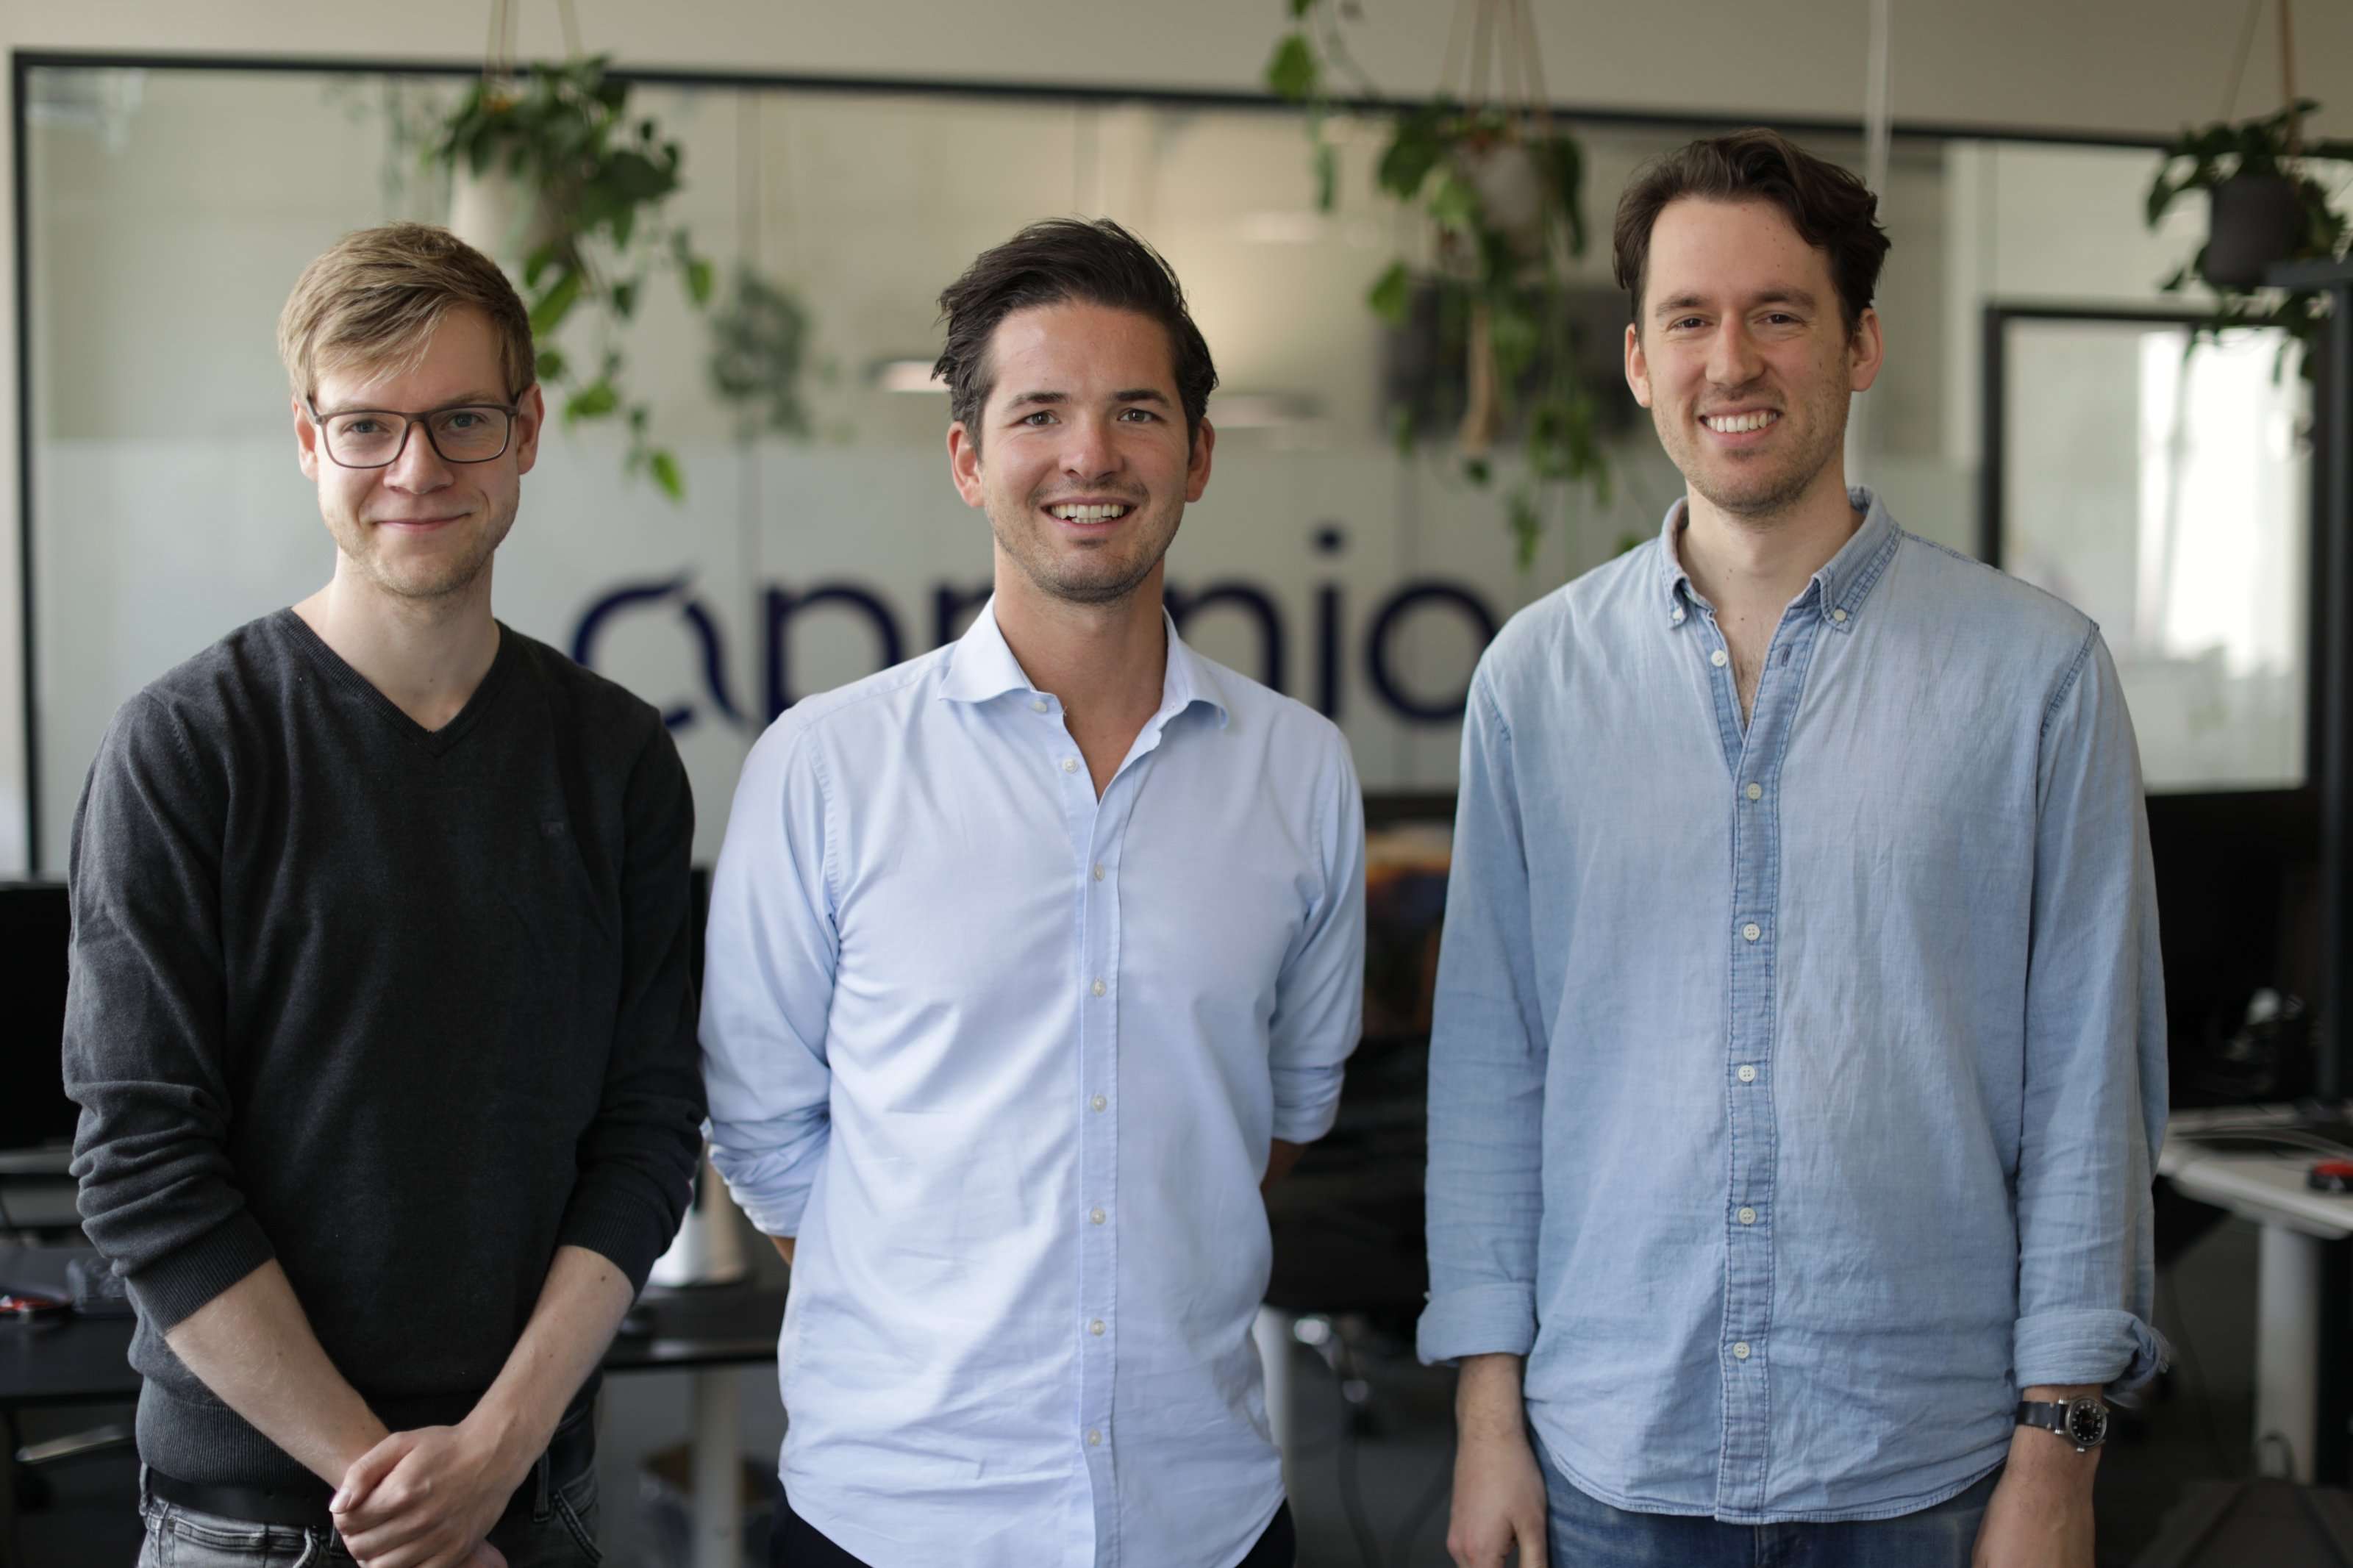 Max Honig is the new CEO of Appinio